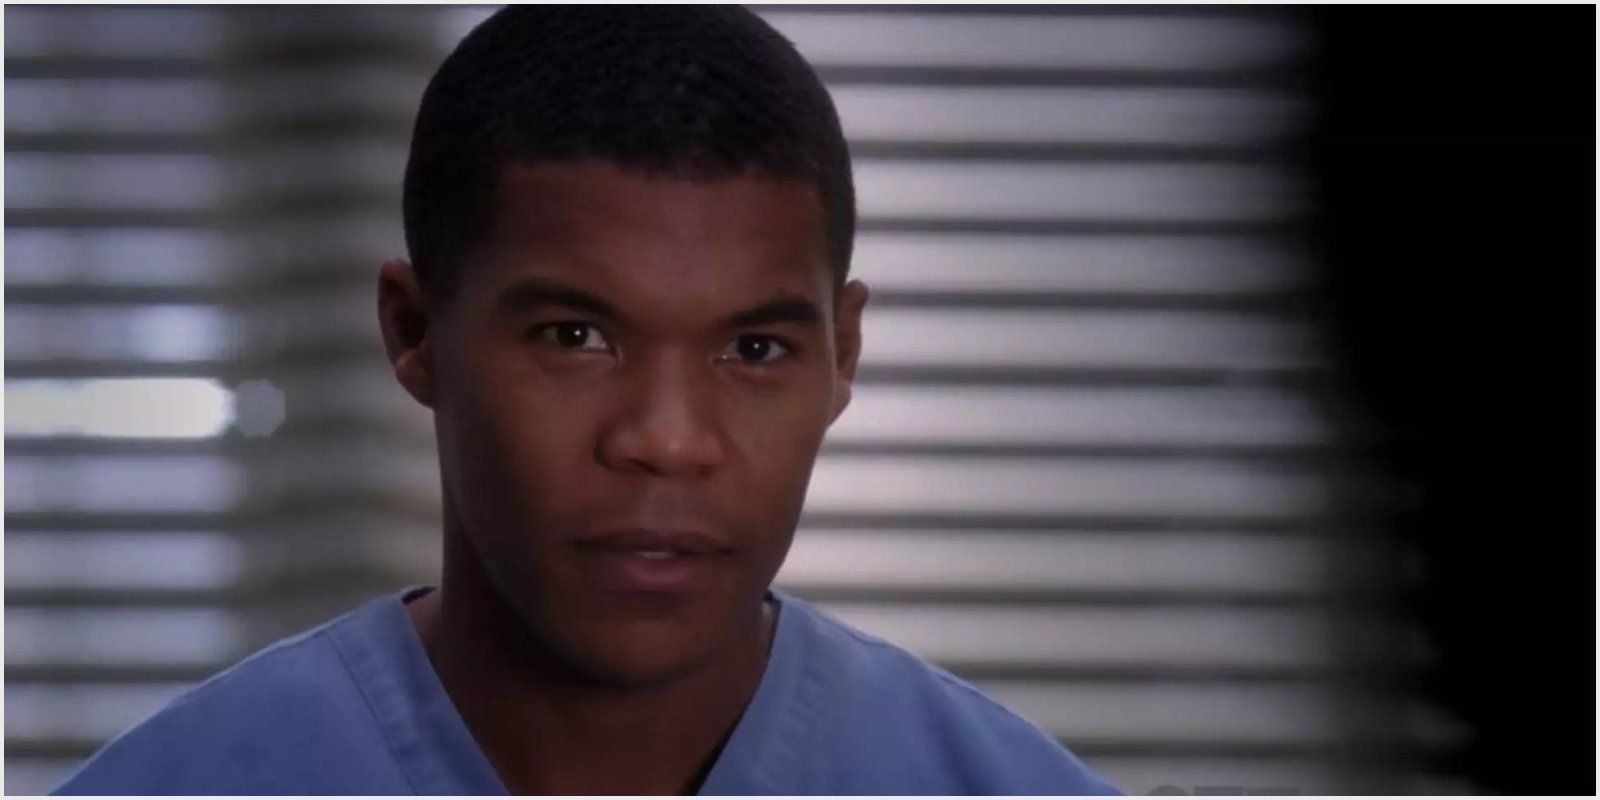 Greys Anatomy The 5 Best (& 5 Worst) Doctors On Call